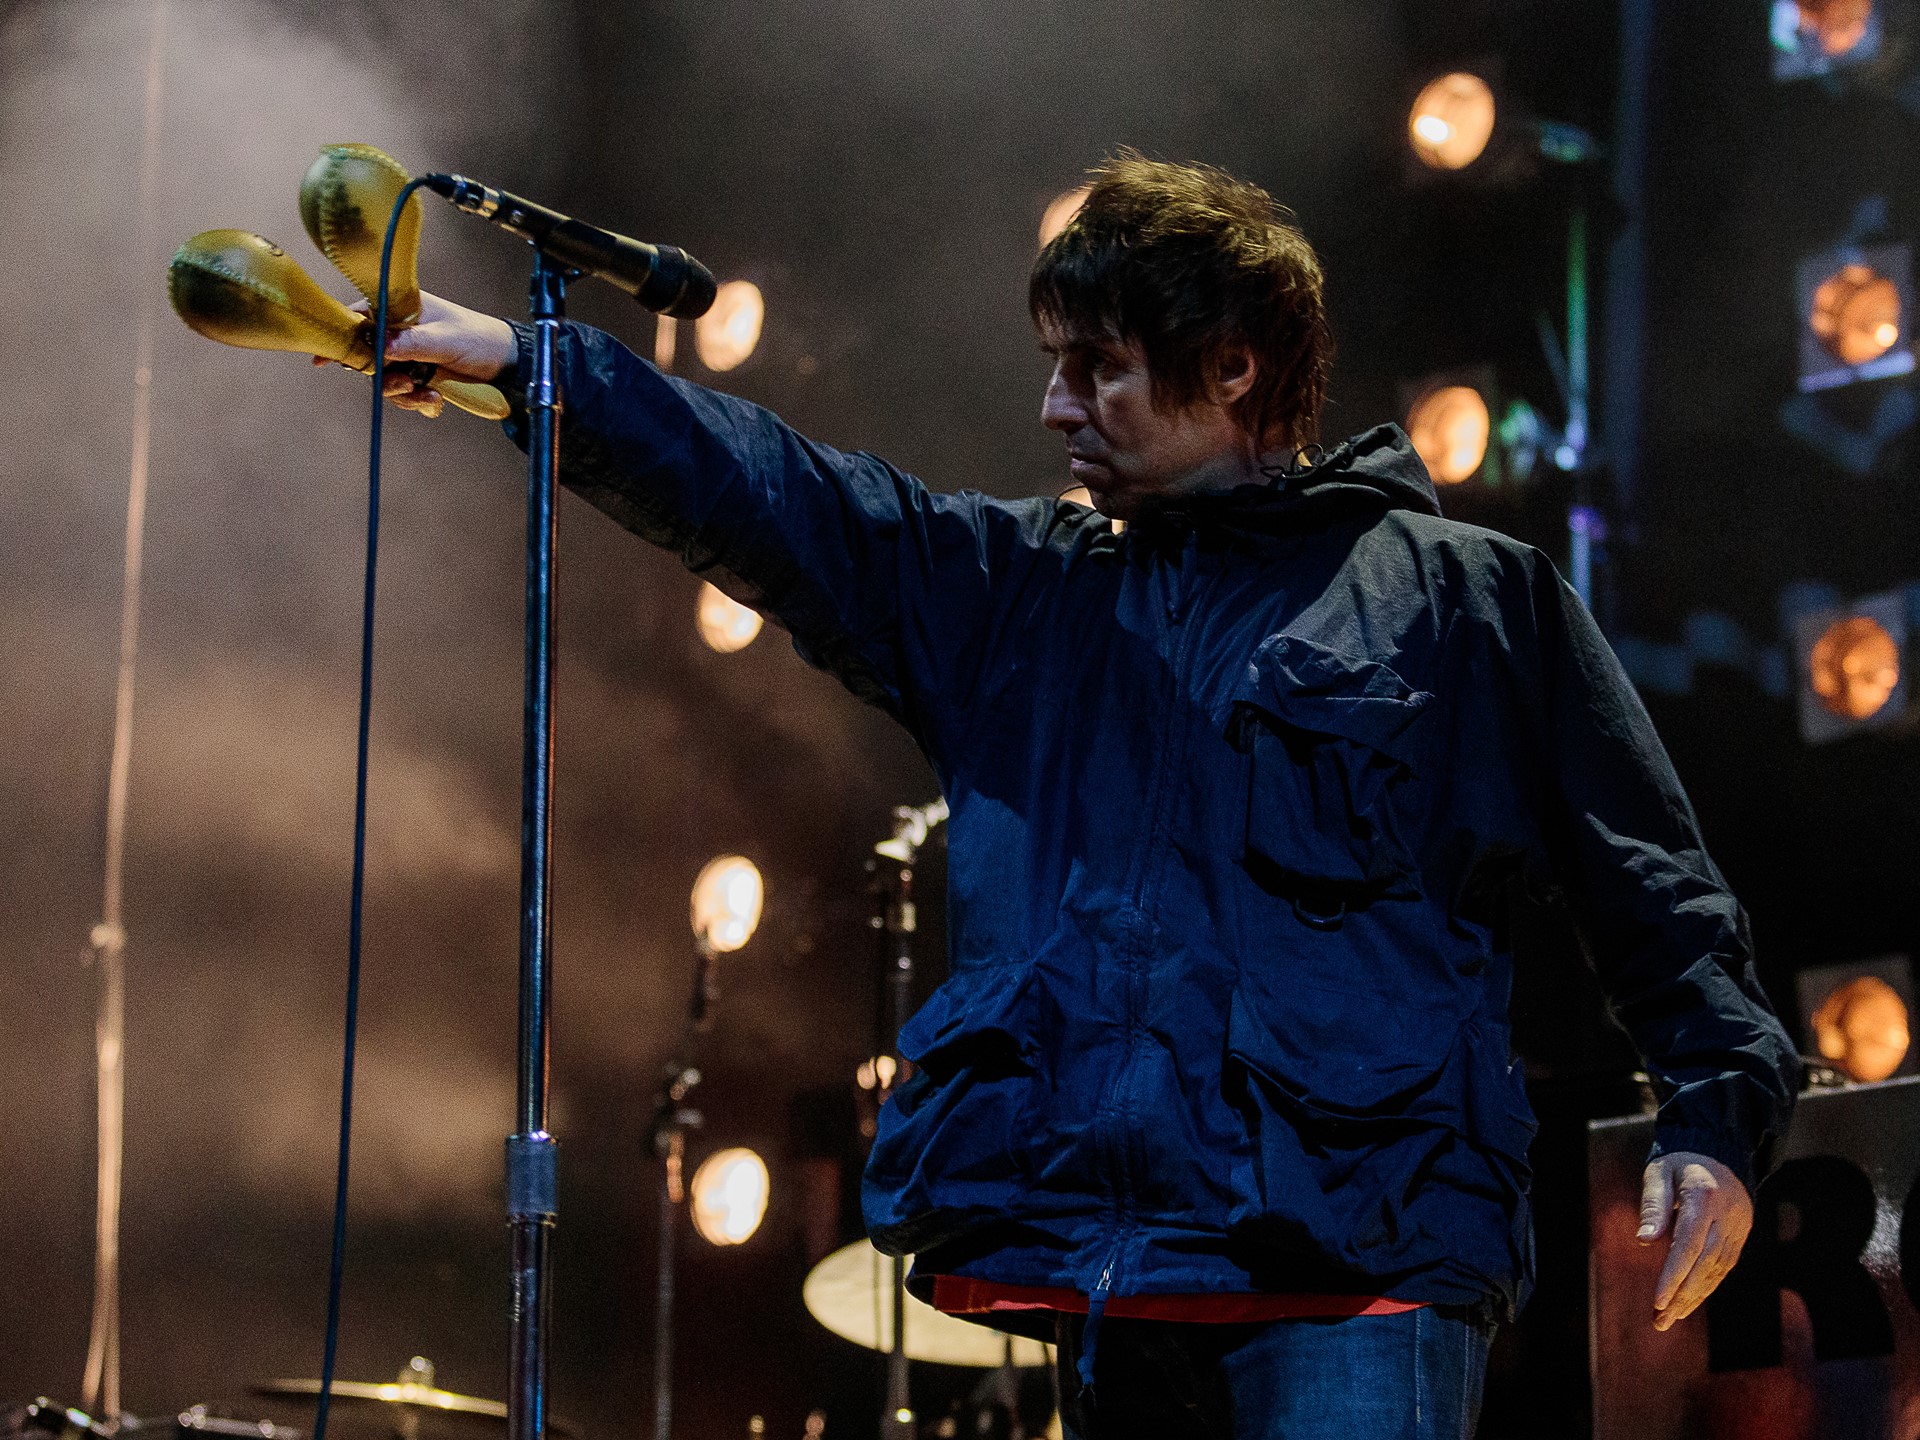 adidas Spezial and Liam Gallagher Concert